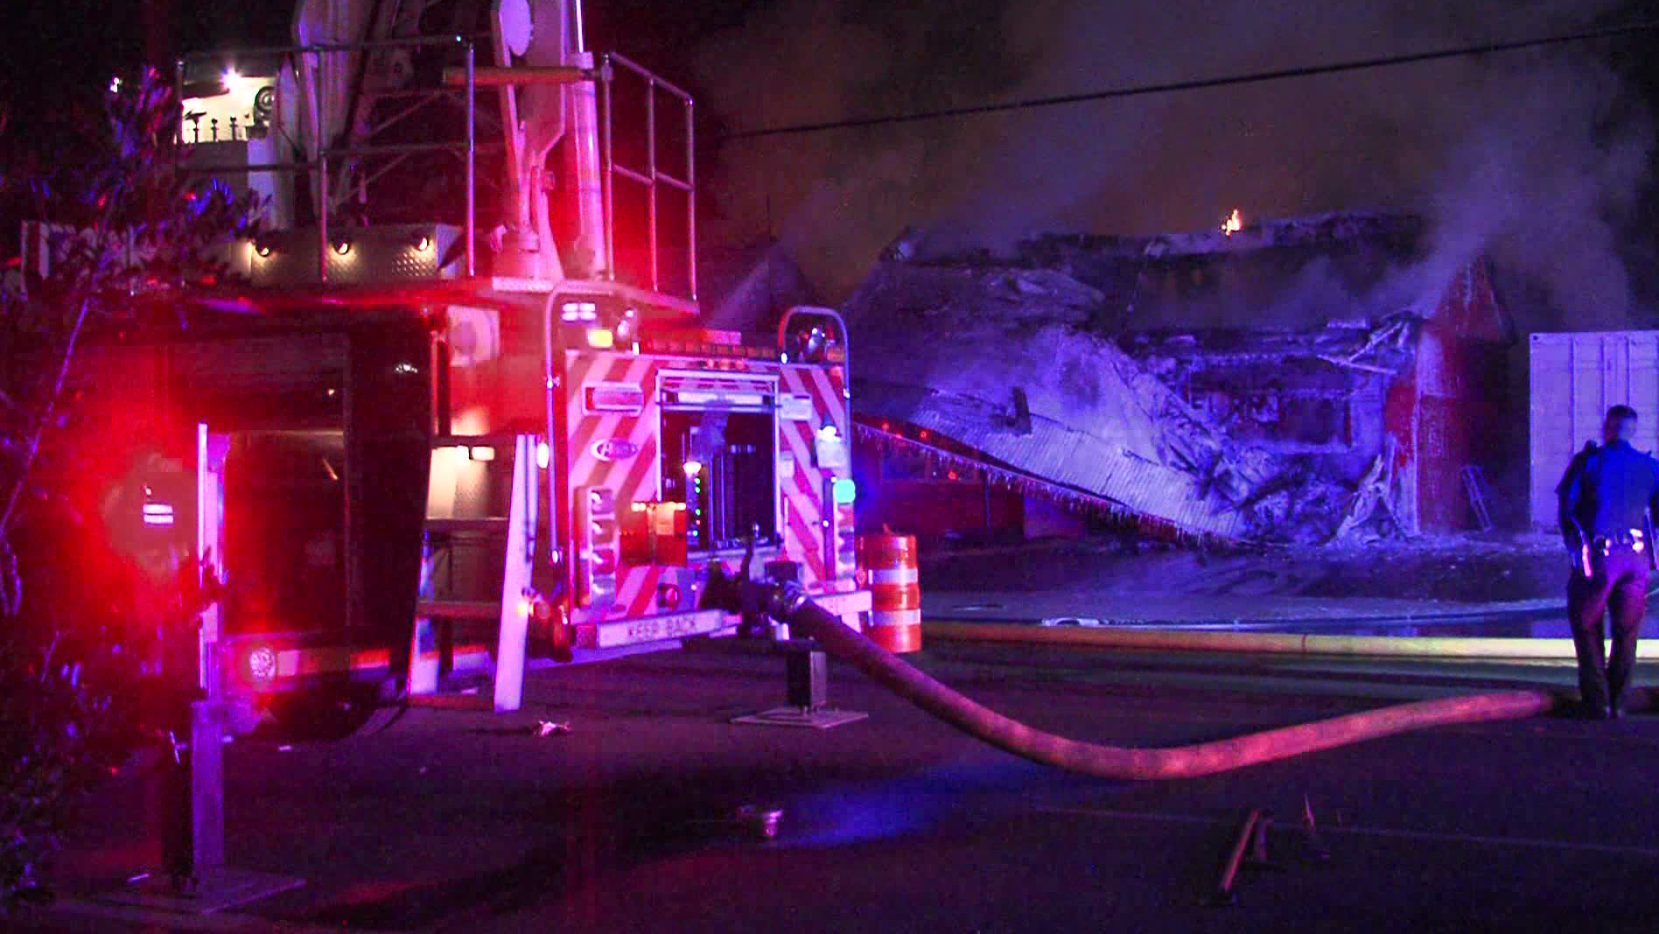 San Antonio Furniture Store Deemed Total Loss After Morning Fire